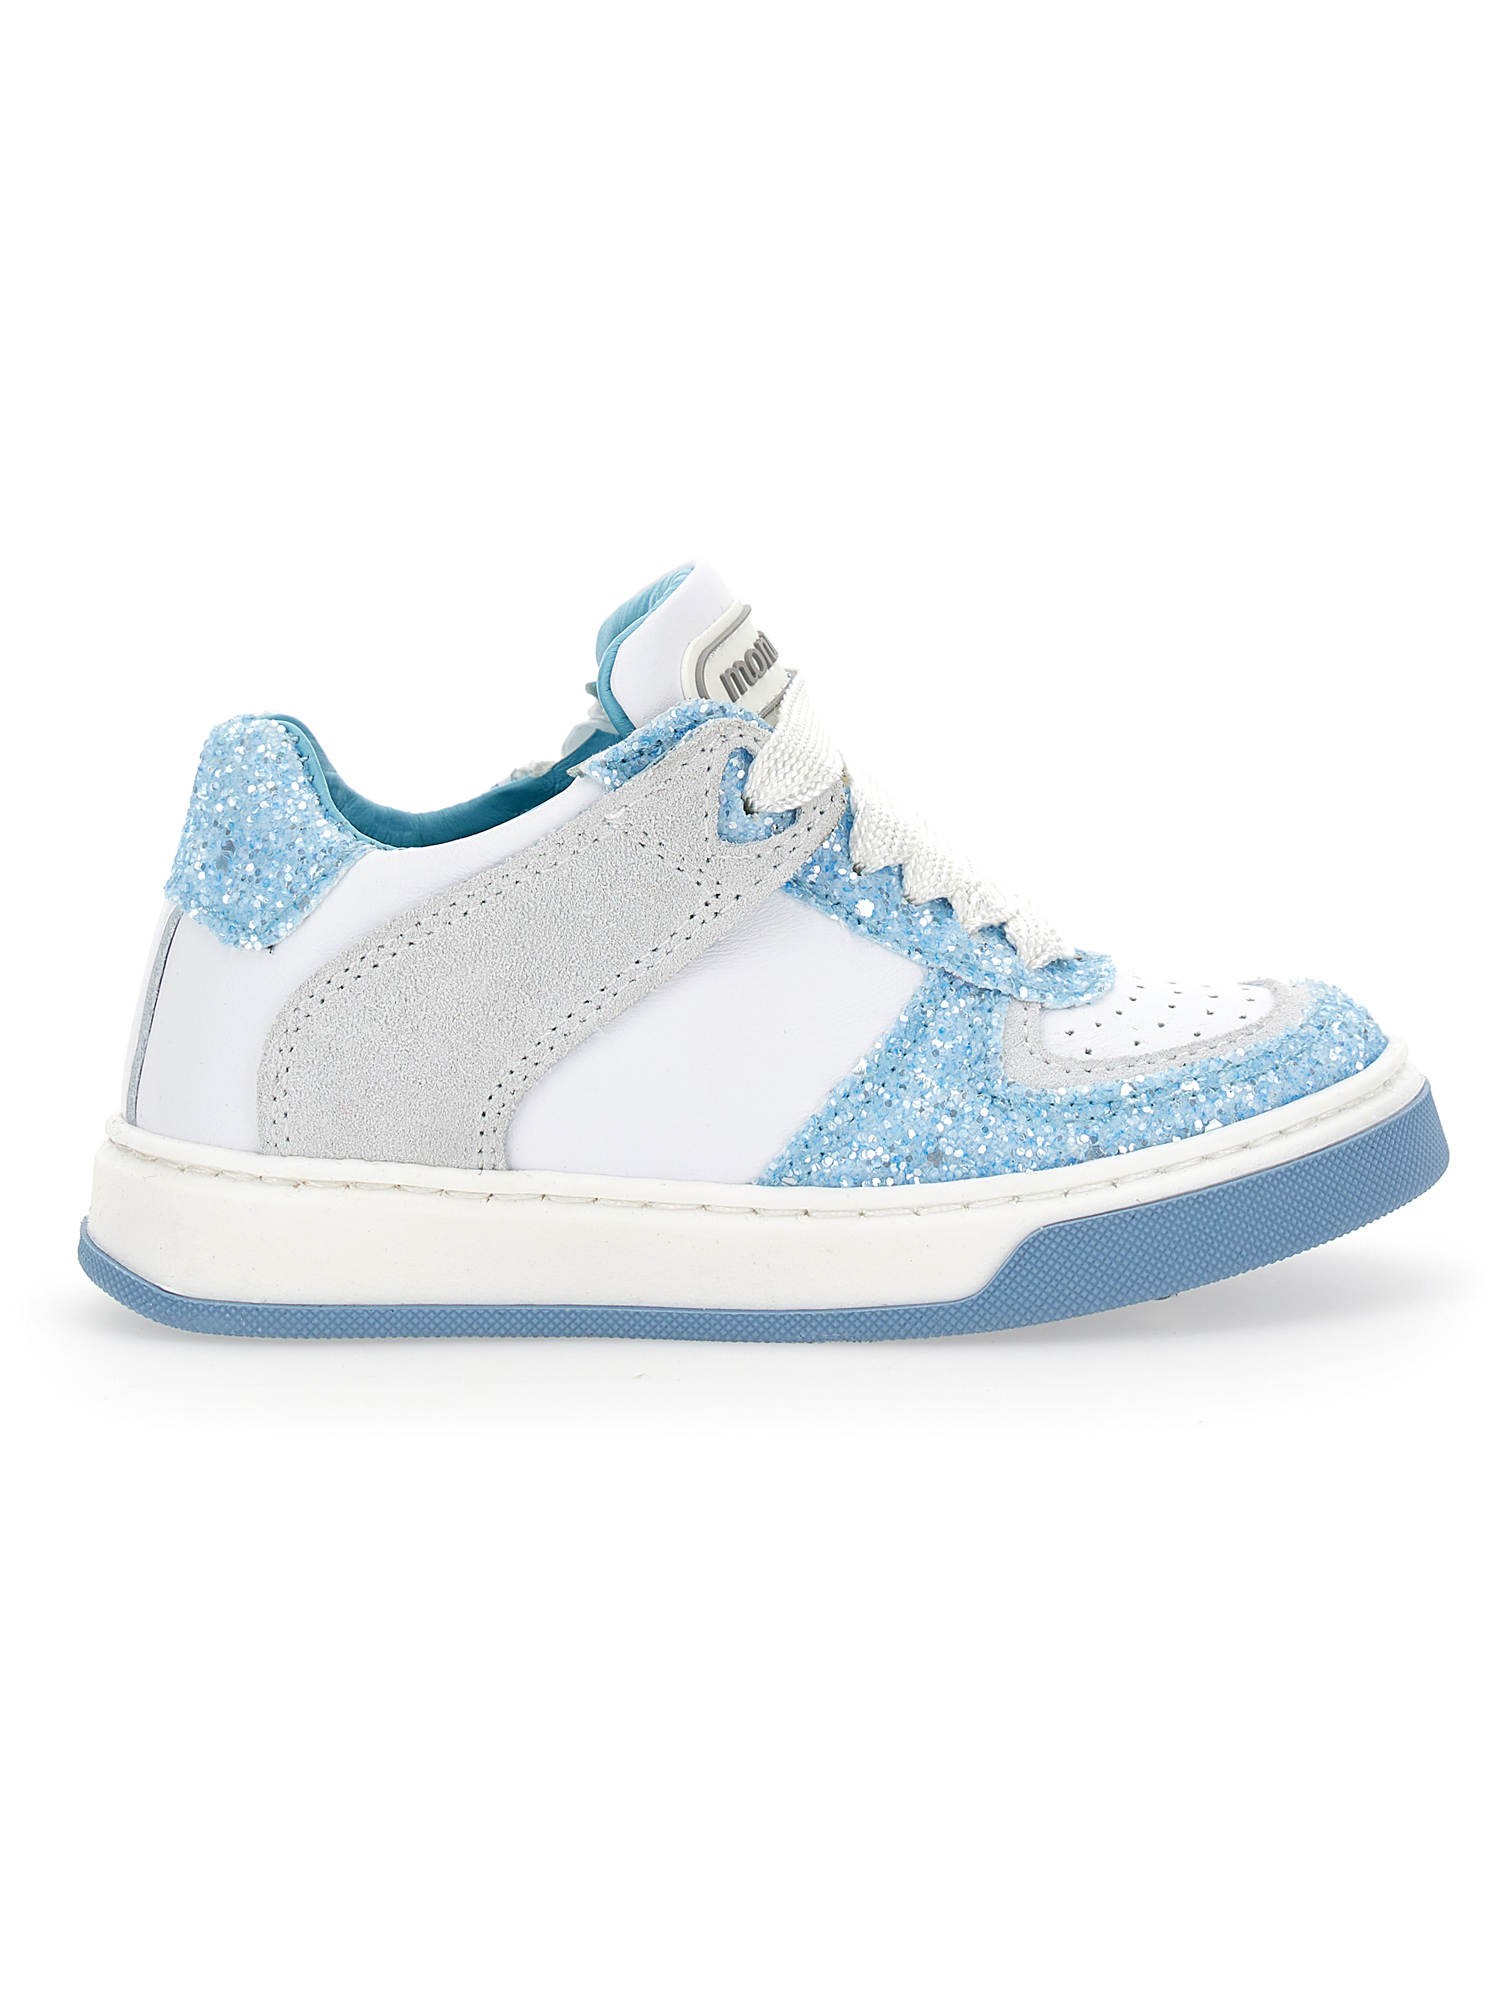 Monnalisa Crust Leather And Glitter Sneakers In Cream White + Sky Blue